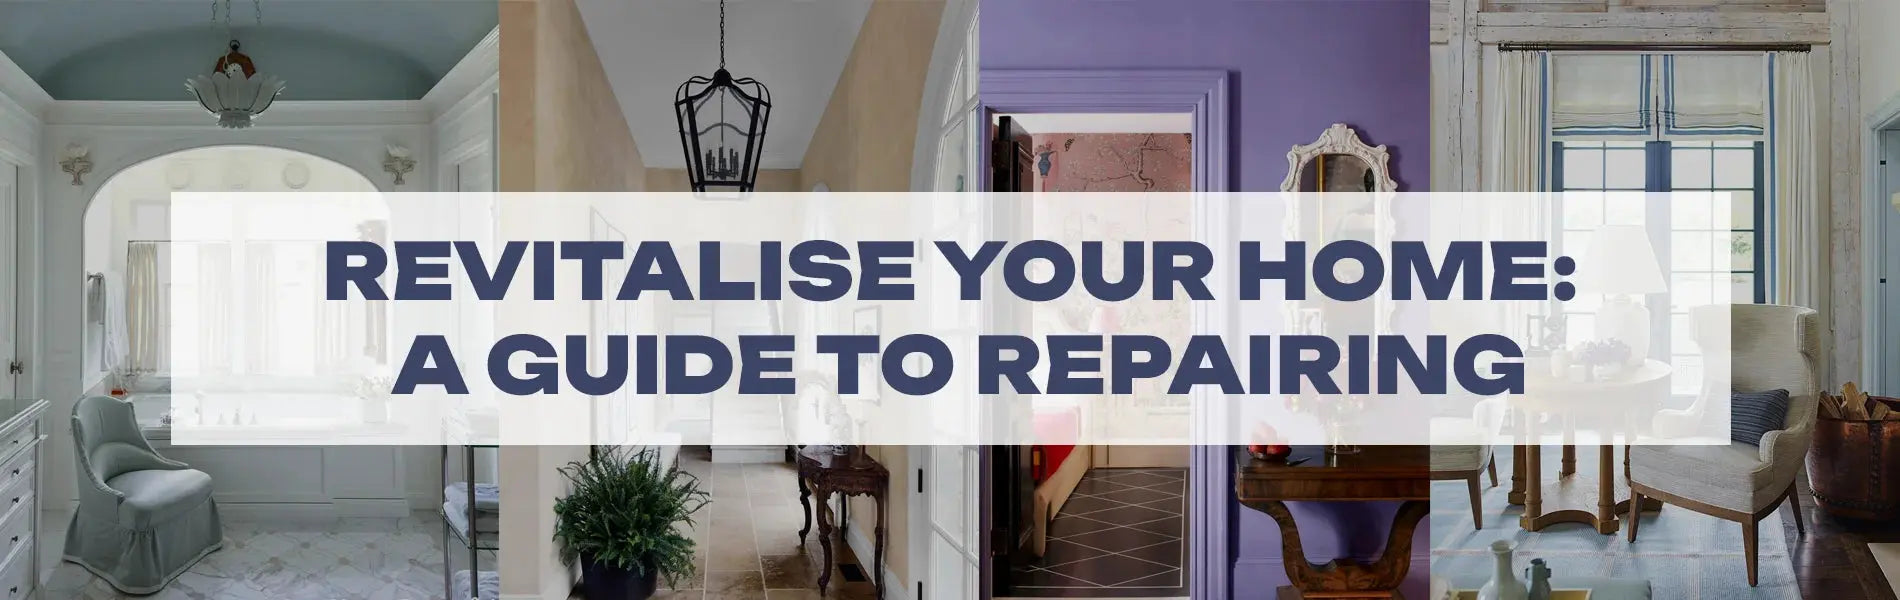 Revitalise-your-Home-A-Guide-to-Repairing Exotic Wood Zone